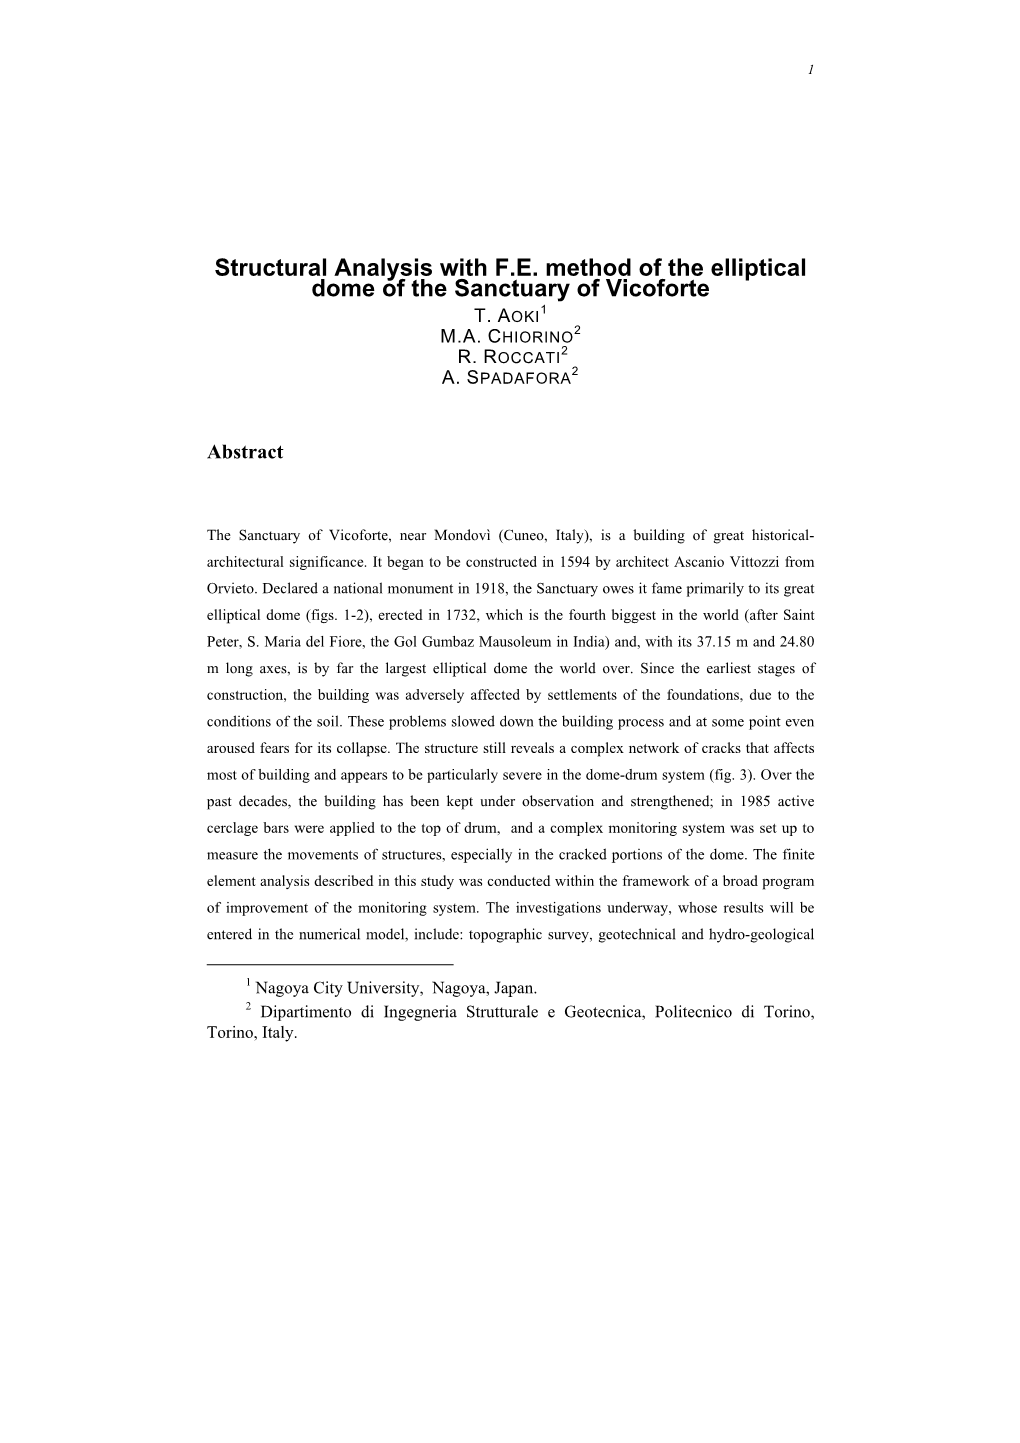 Structural Analysis with F.E. Method of the Elliptical Dome of the Sanctuary of Vicoforte T